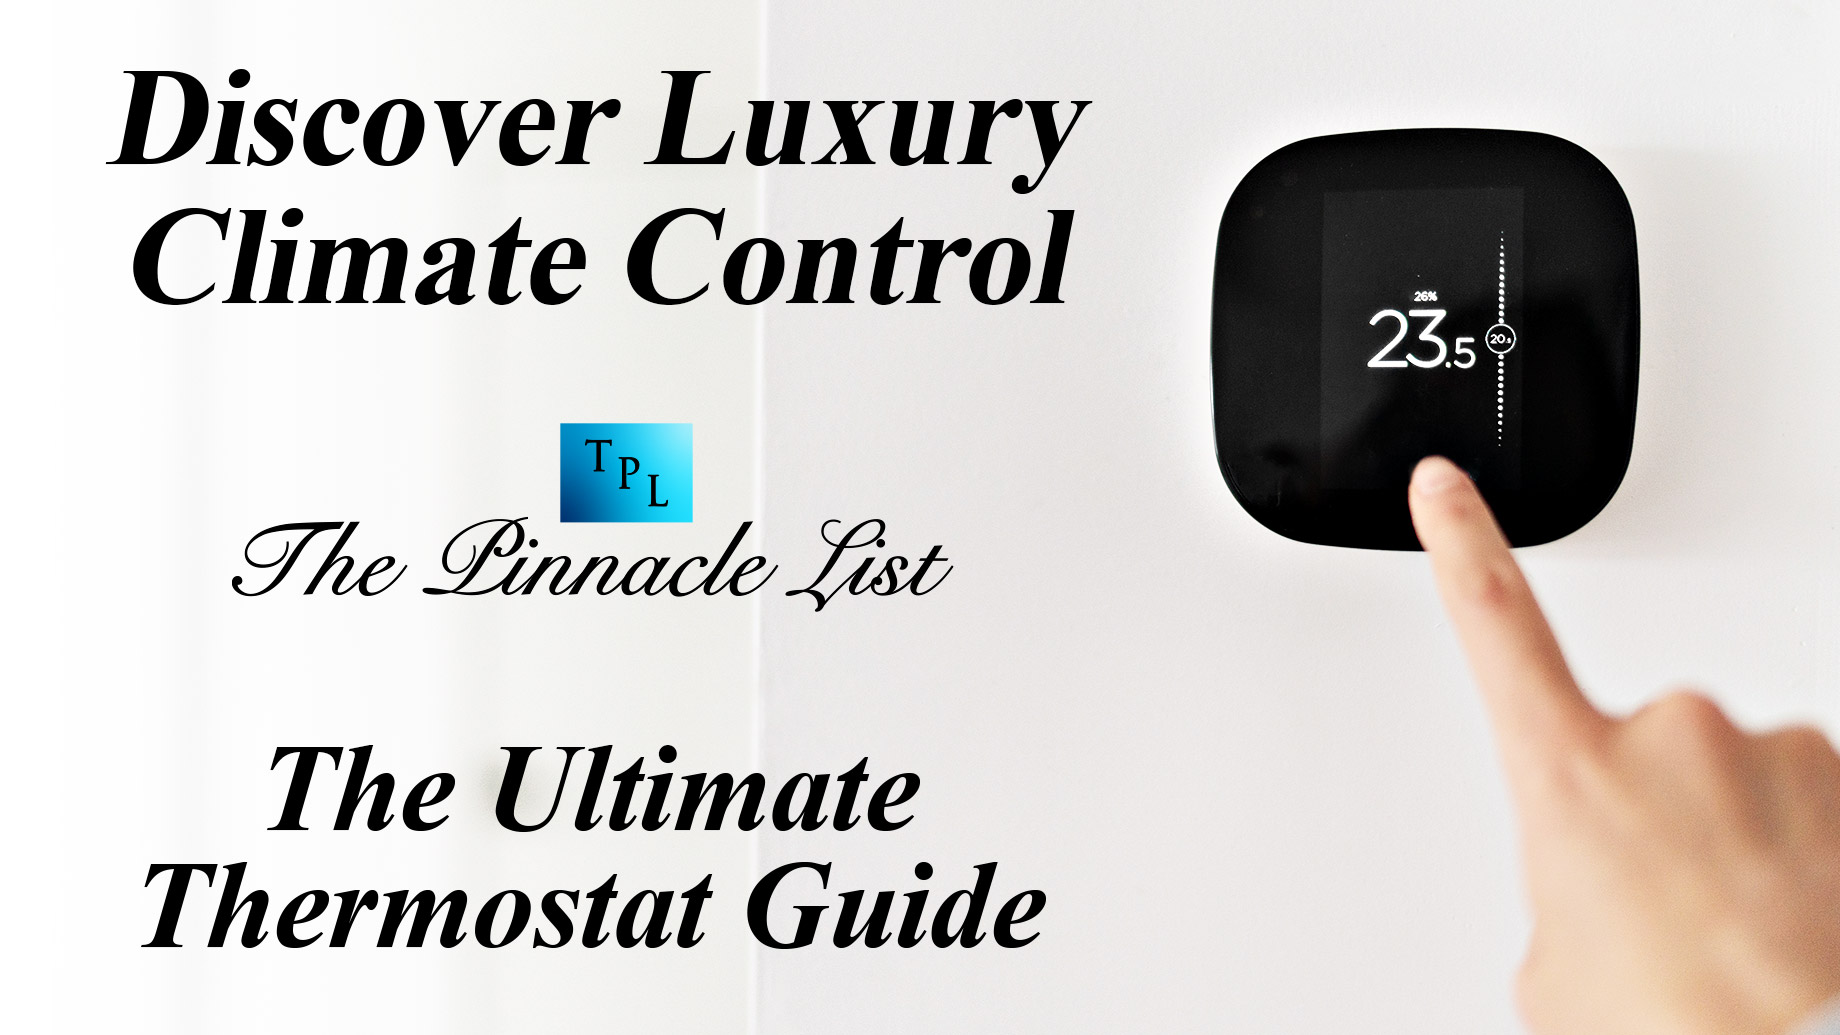 Discover Luxury Climate Control: The Ultimate Thermostat Guide